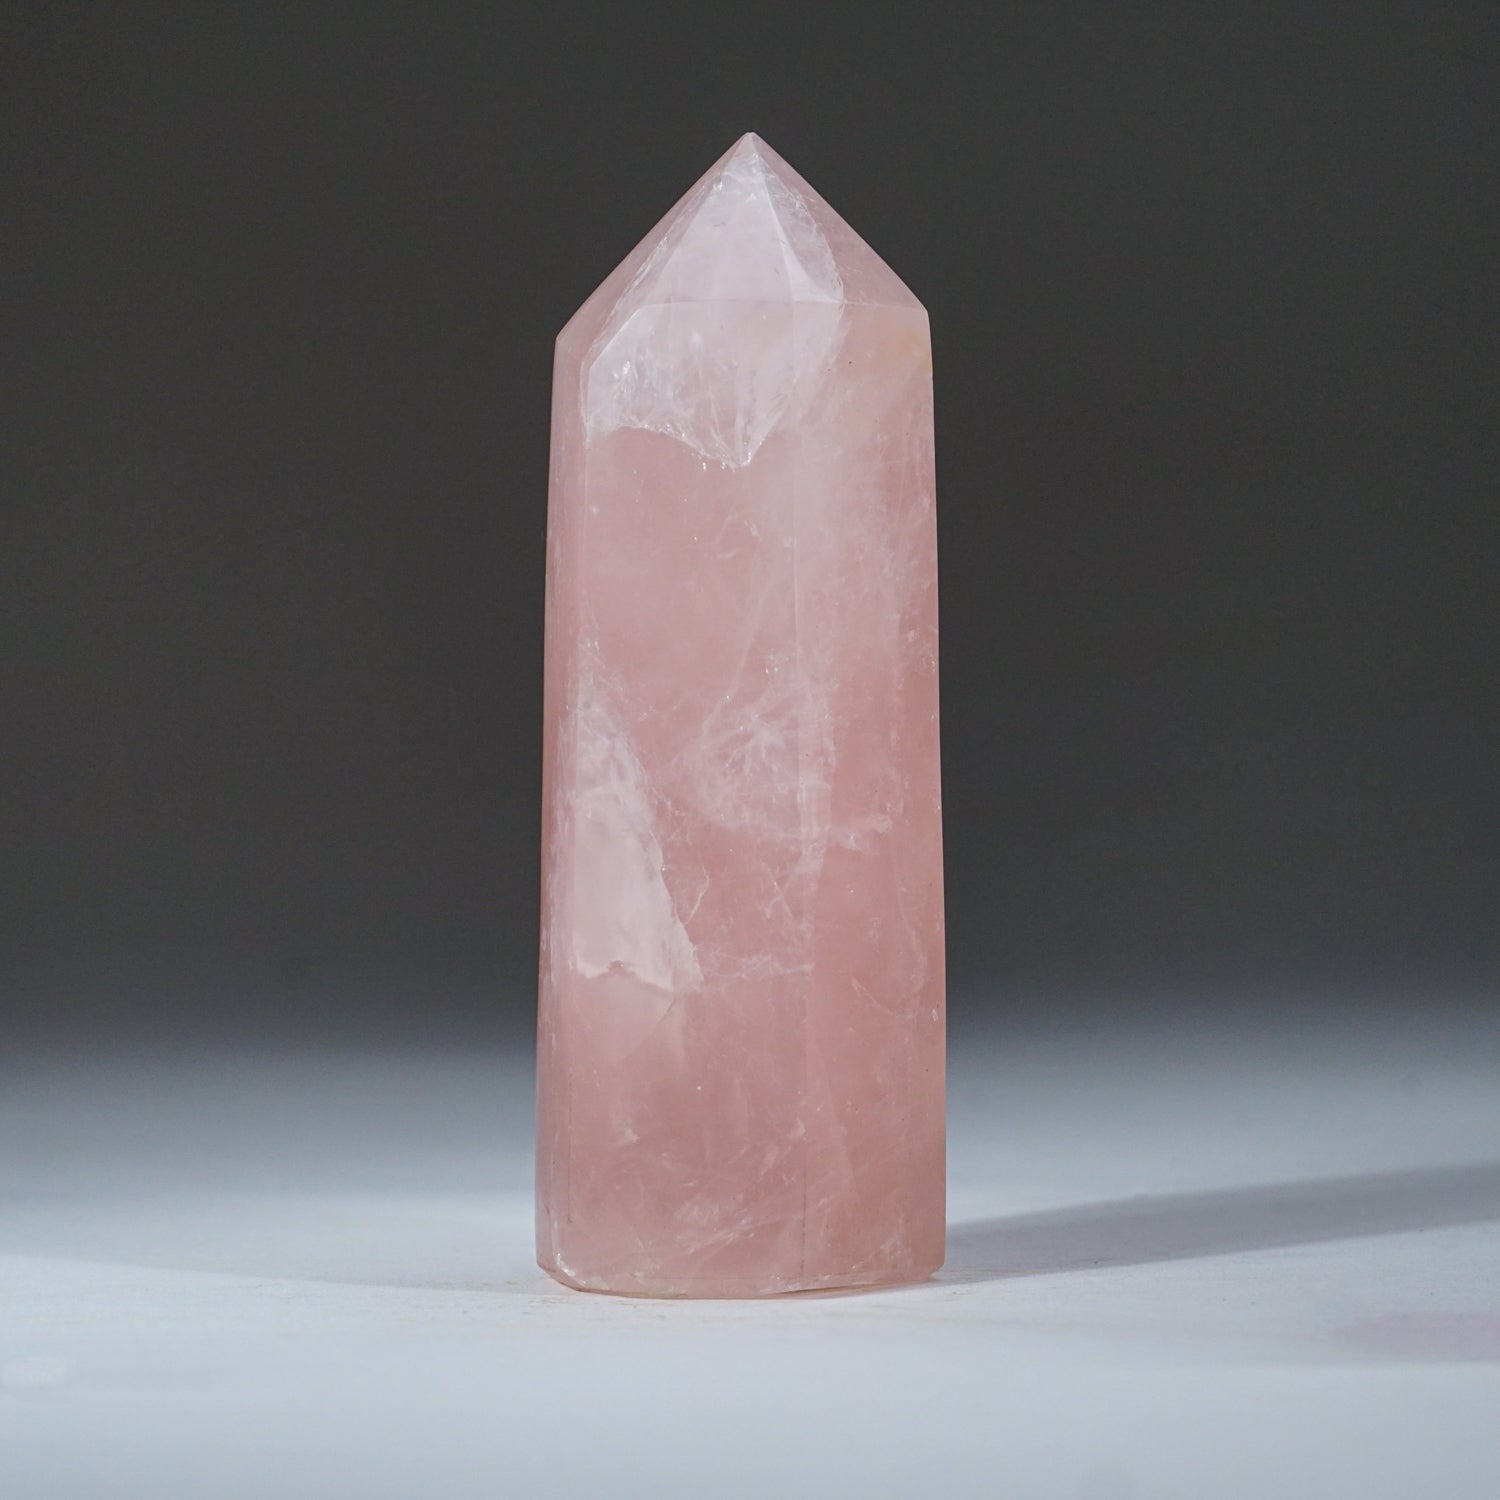 Genuine Rose Quartz Polished Point from Brazil (1.2 lbs)